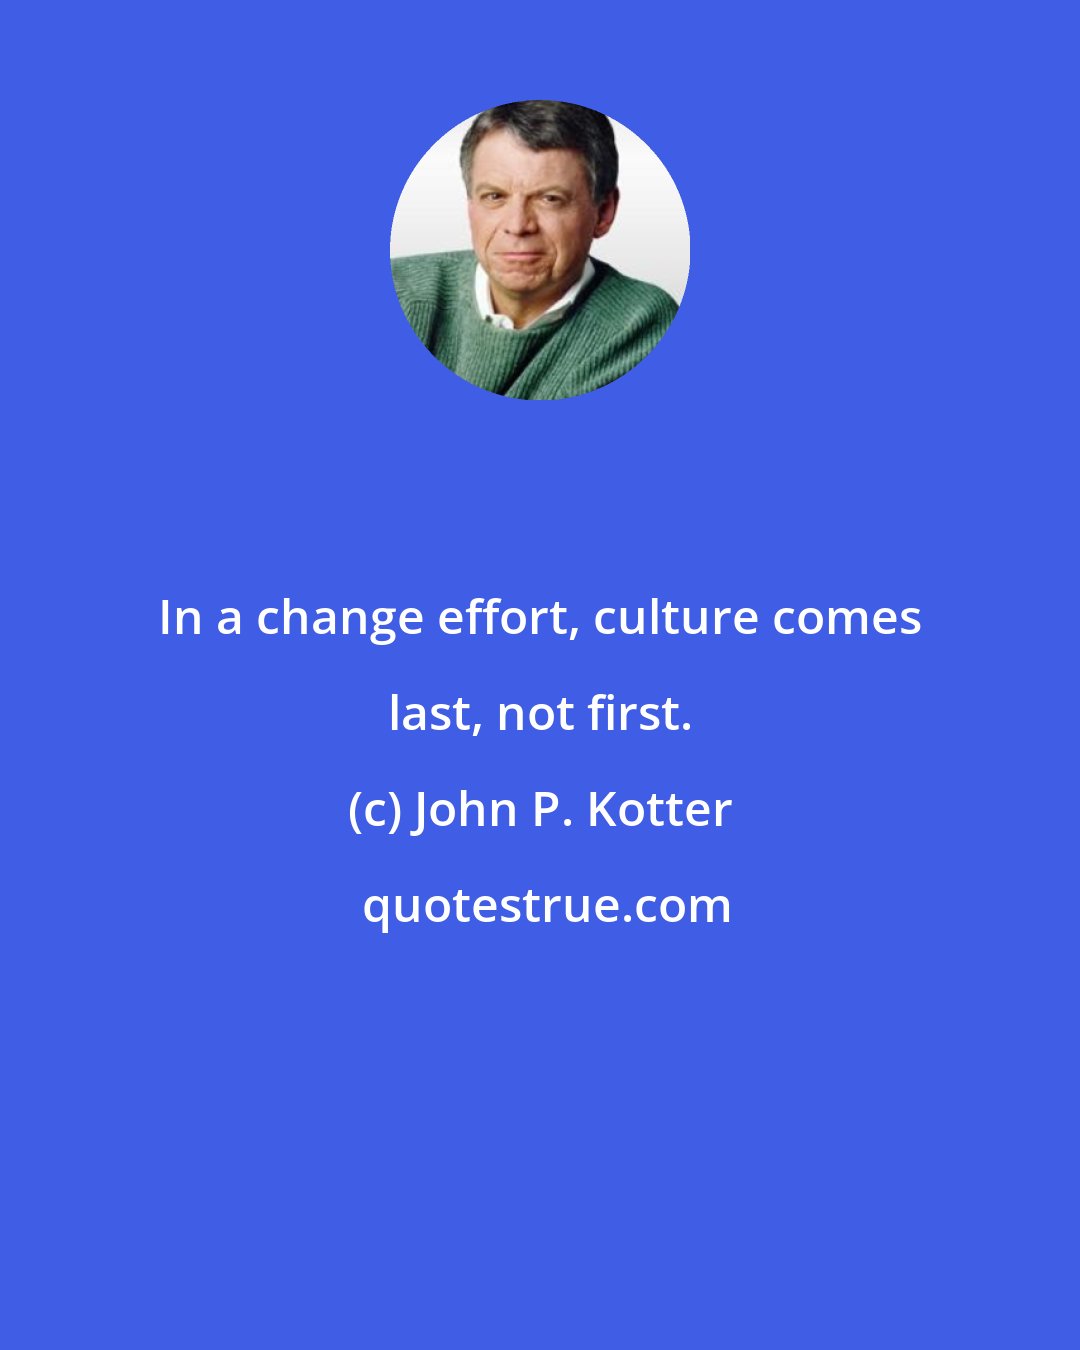 John P. Kotter: In a change effort, culture comes last, not first.